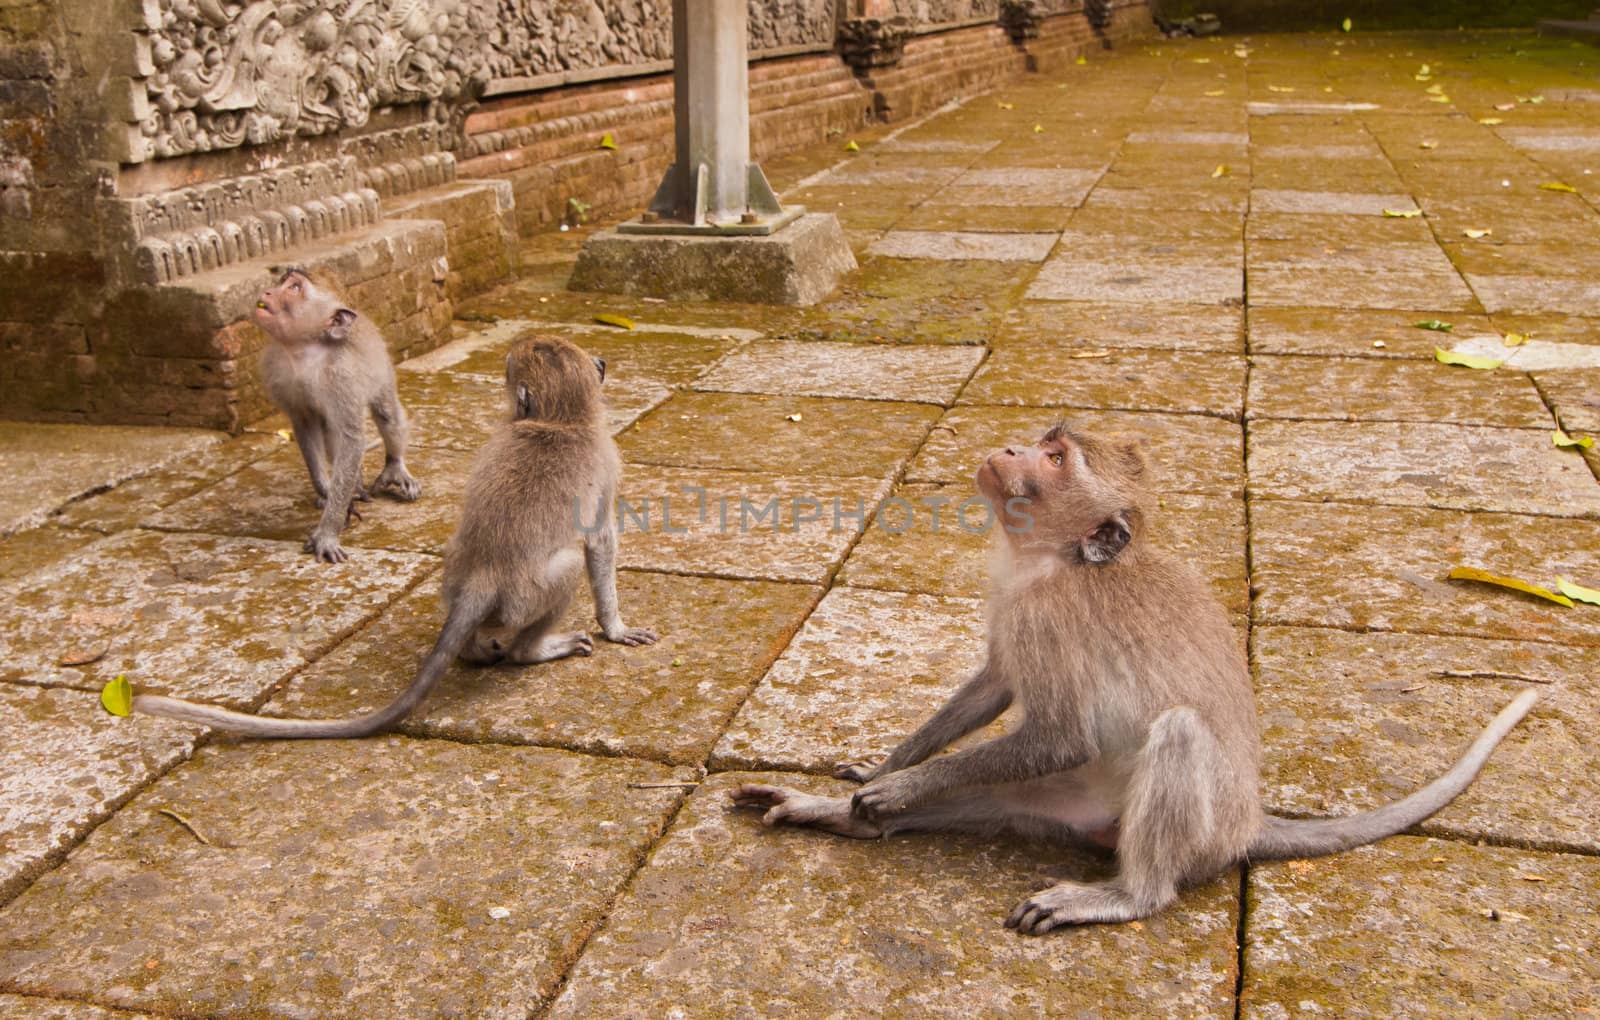 Long-tailed macaques by nvelichko